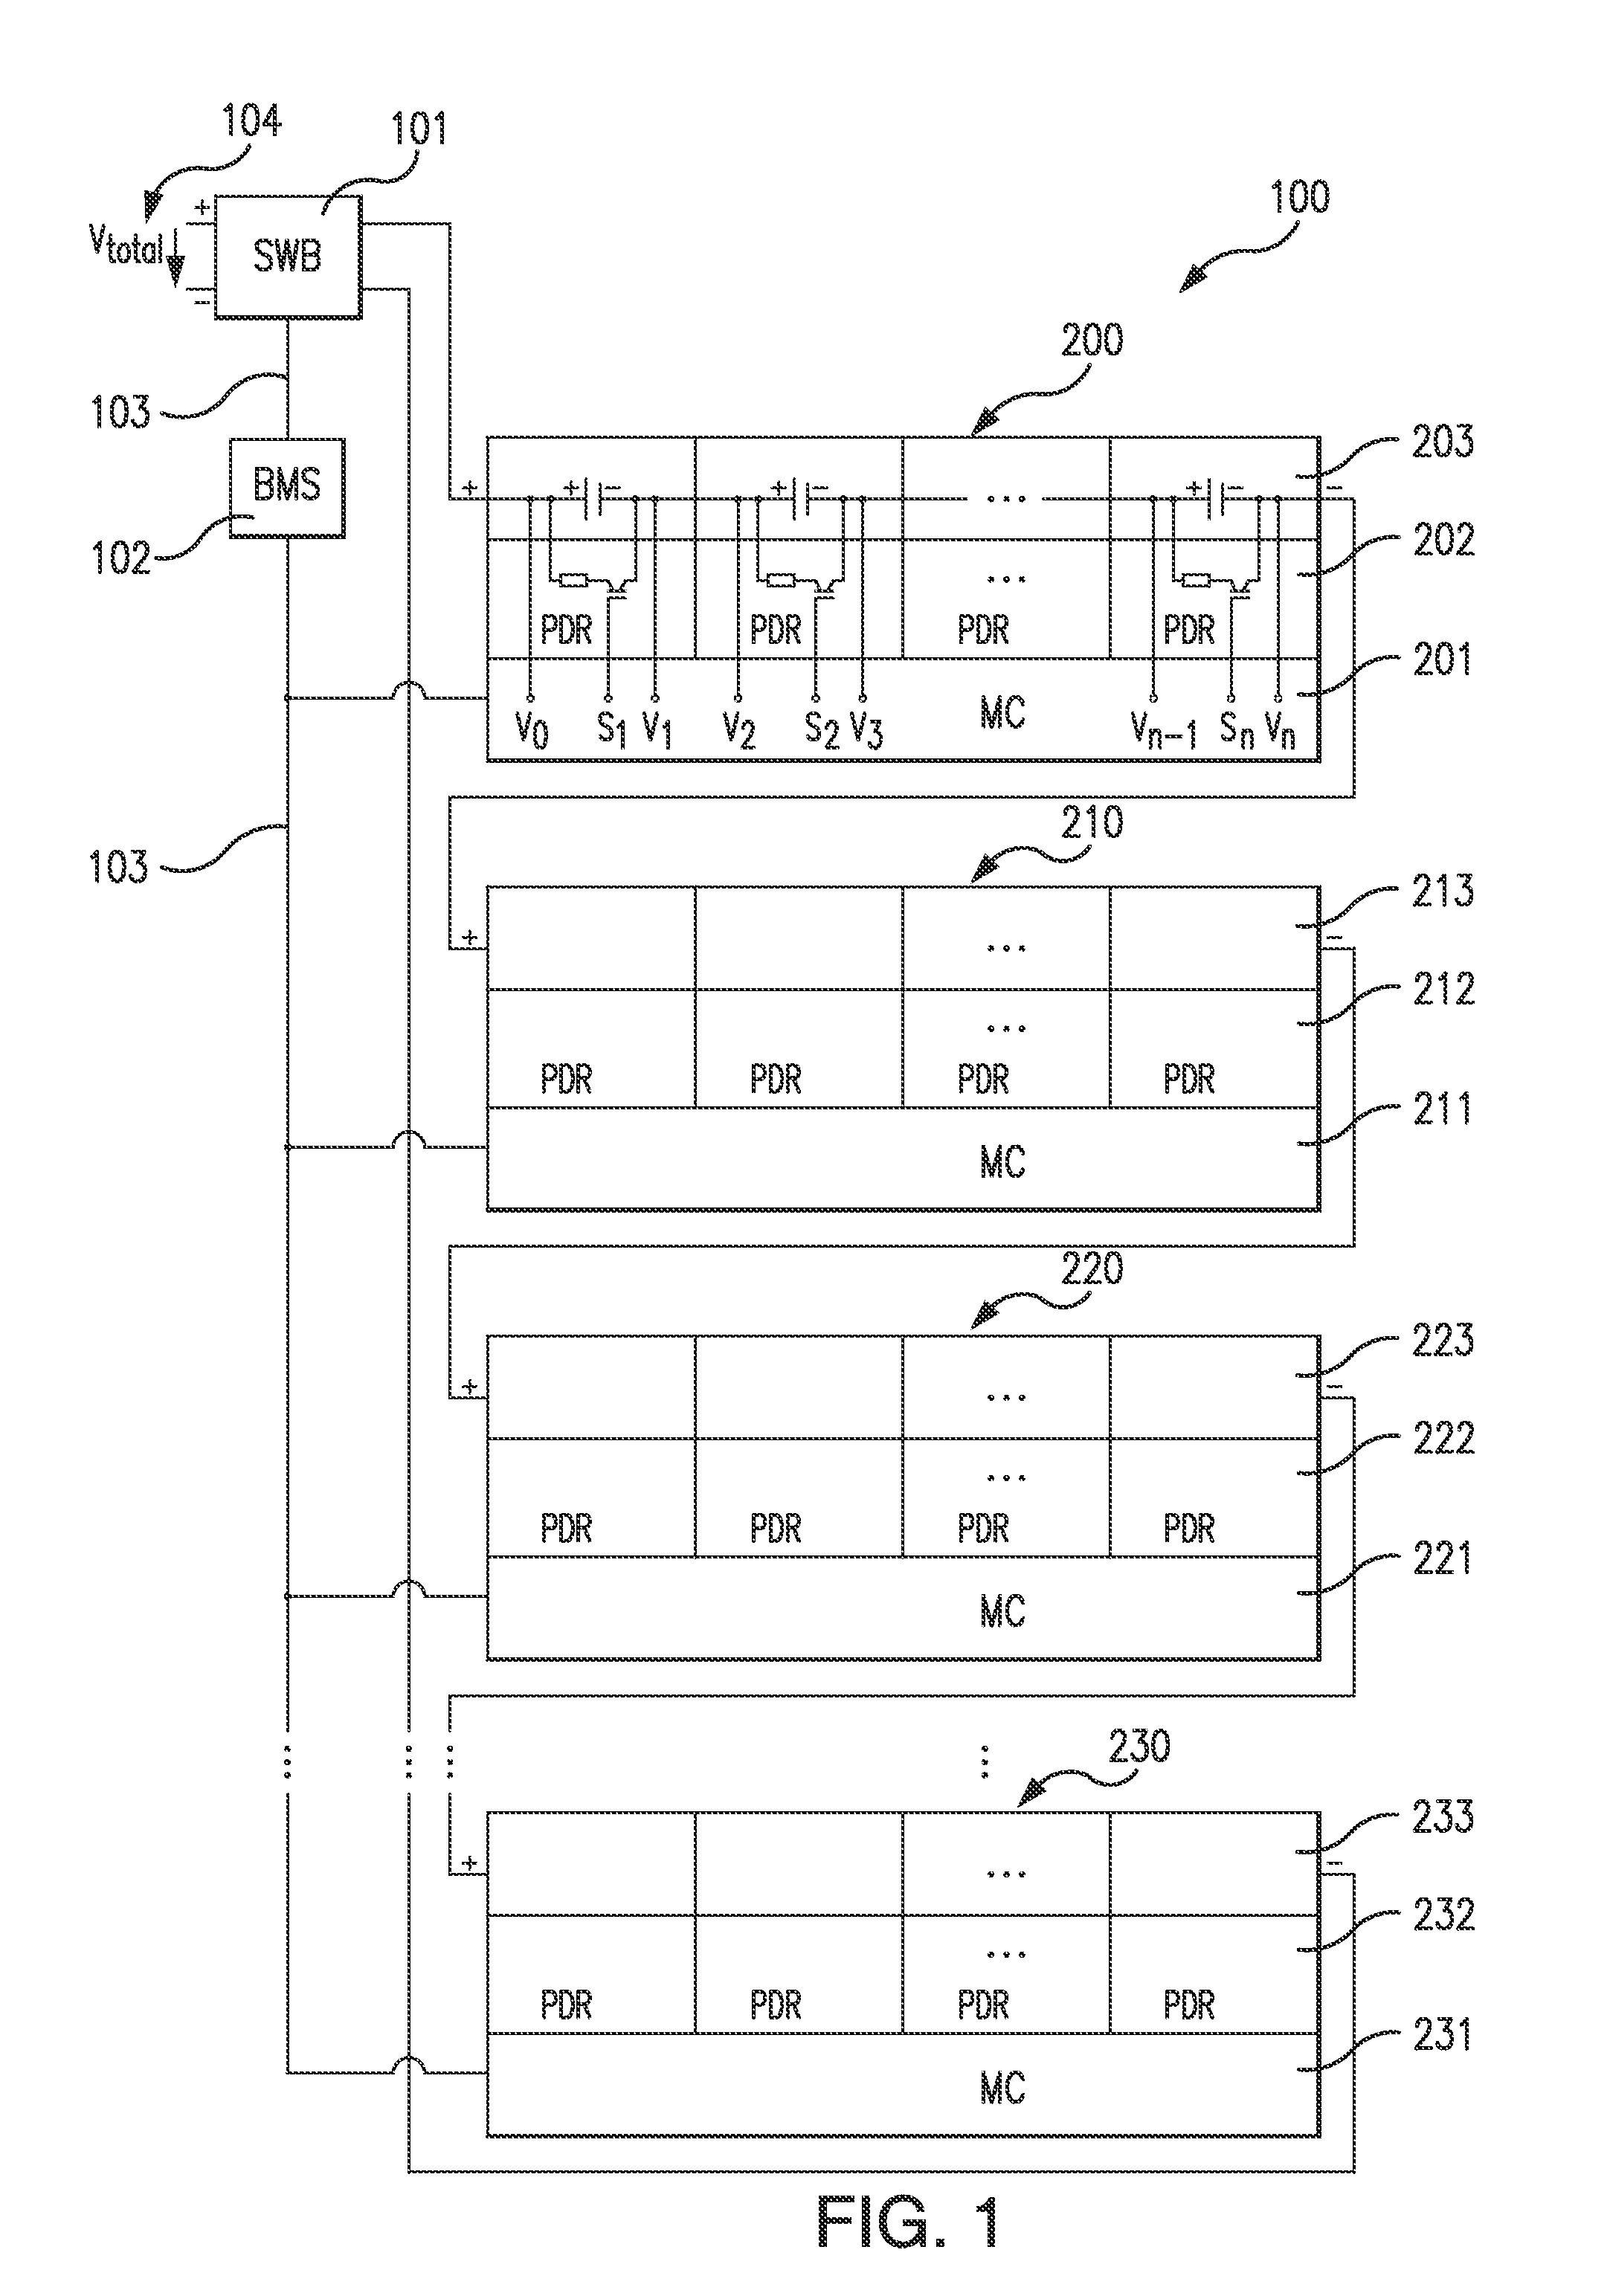 Balancing Voltage for a Multi-Cell Battery System